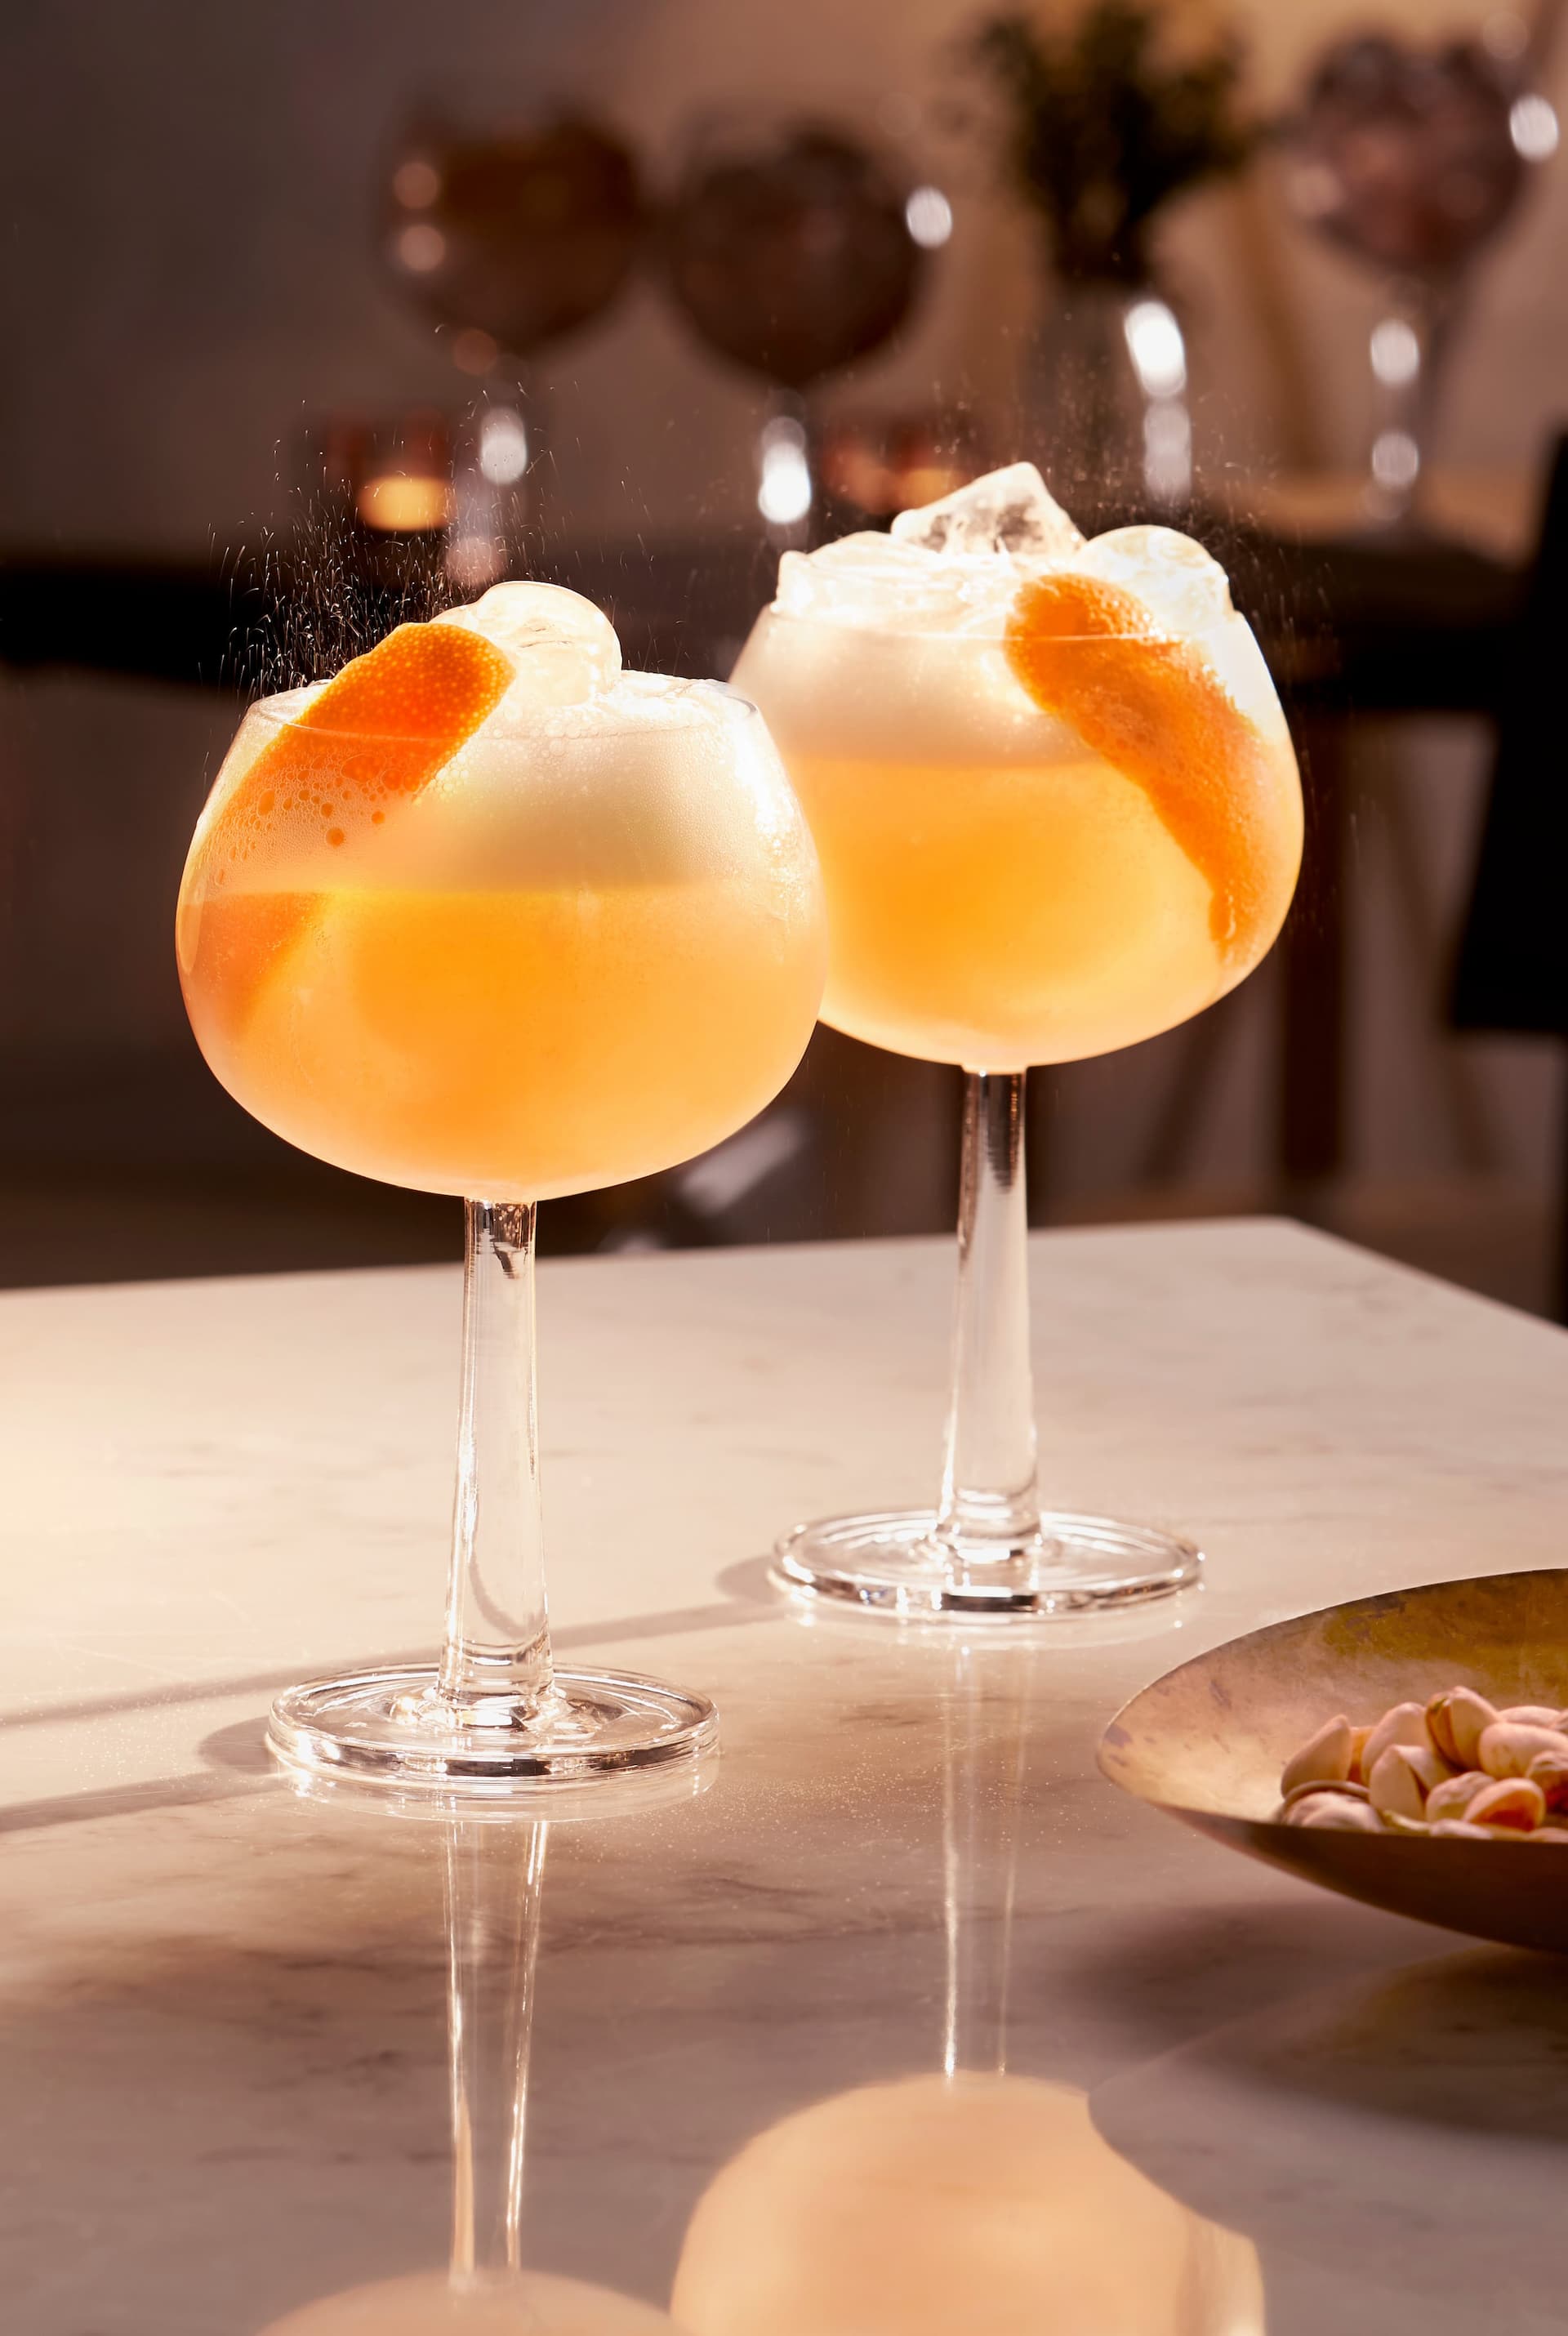 Two grapefruit spritz cocktails made with Tanqueray No. Ten and garnished with oranges.